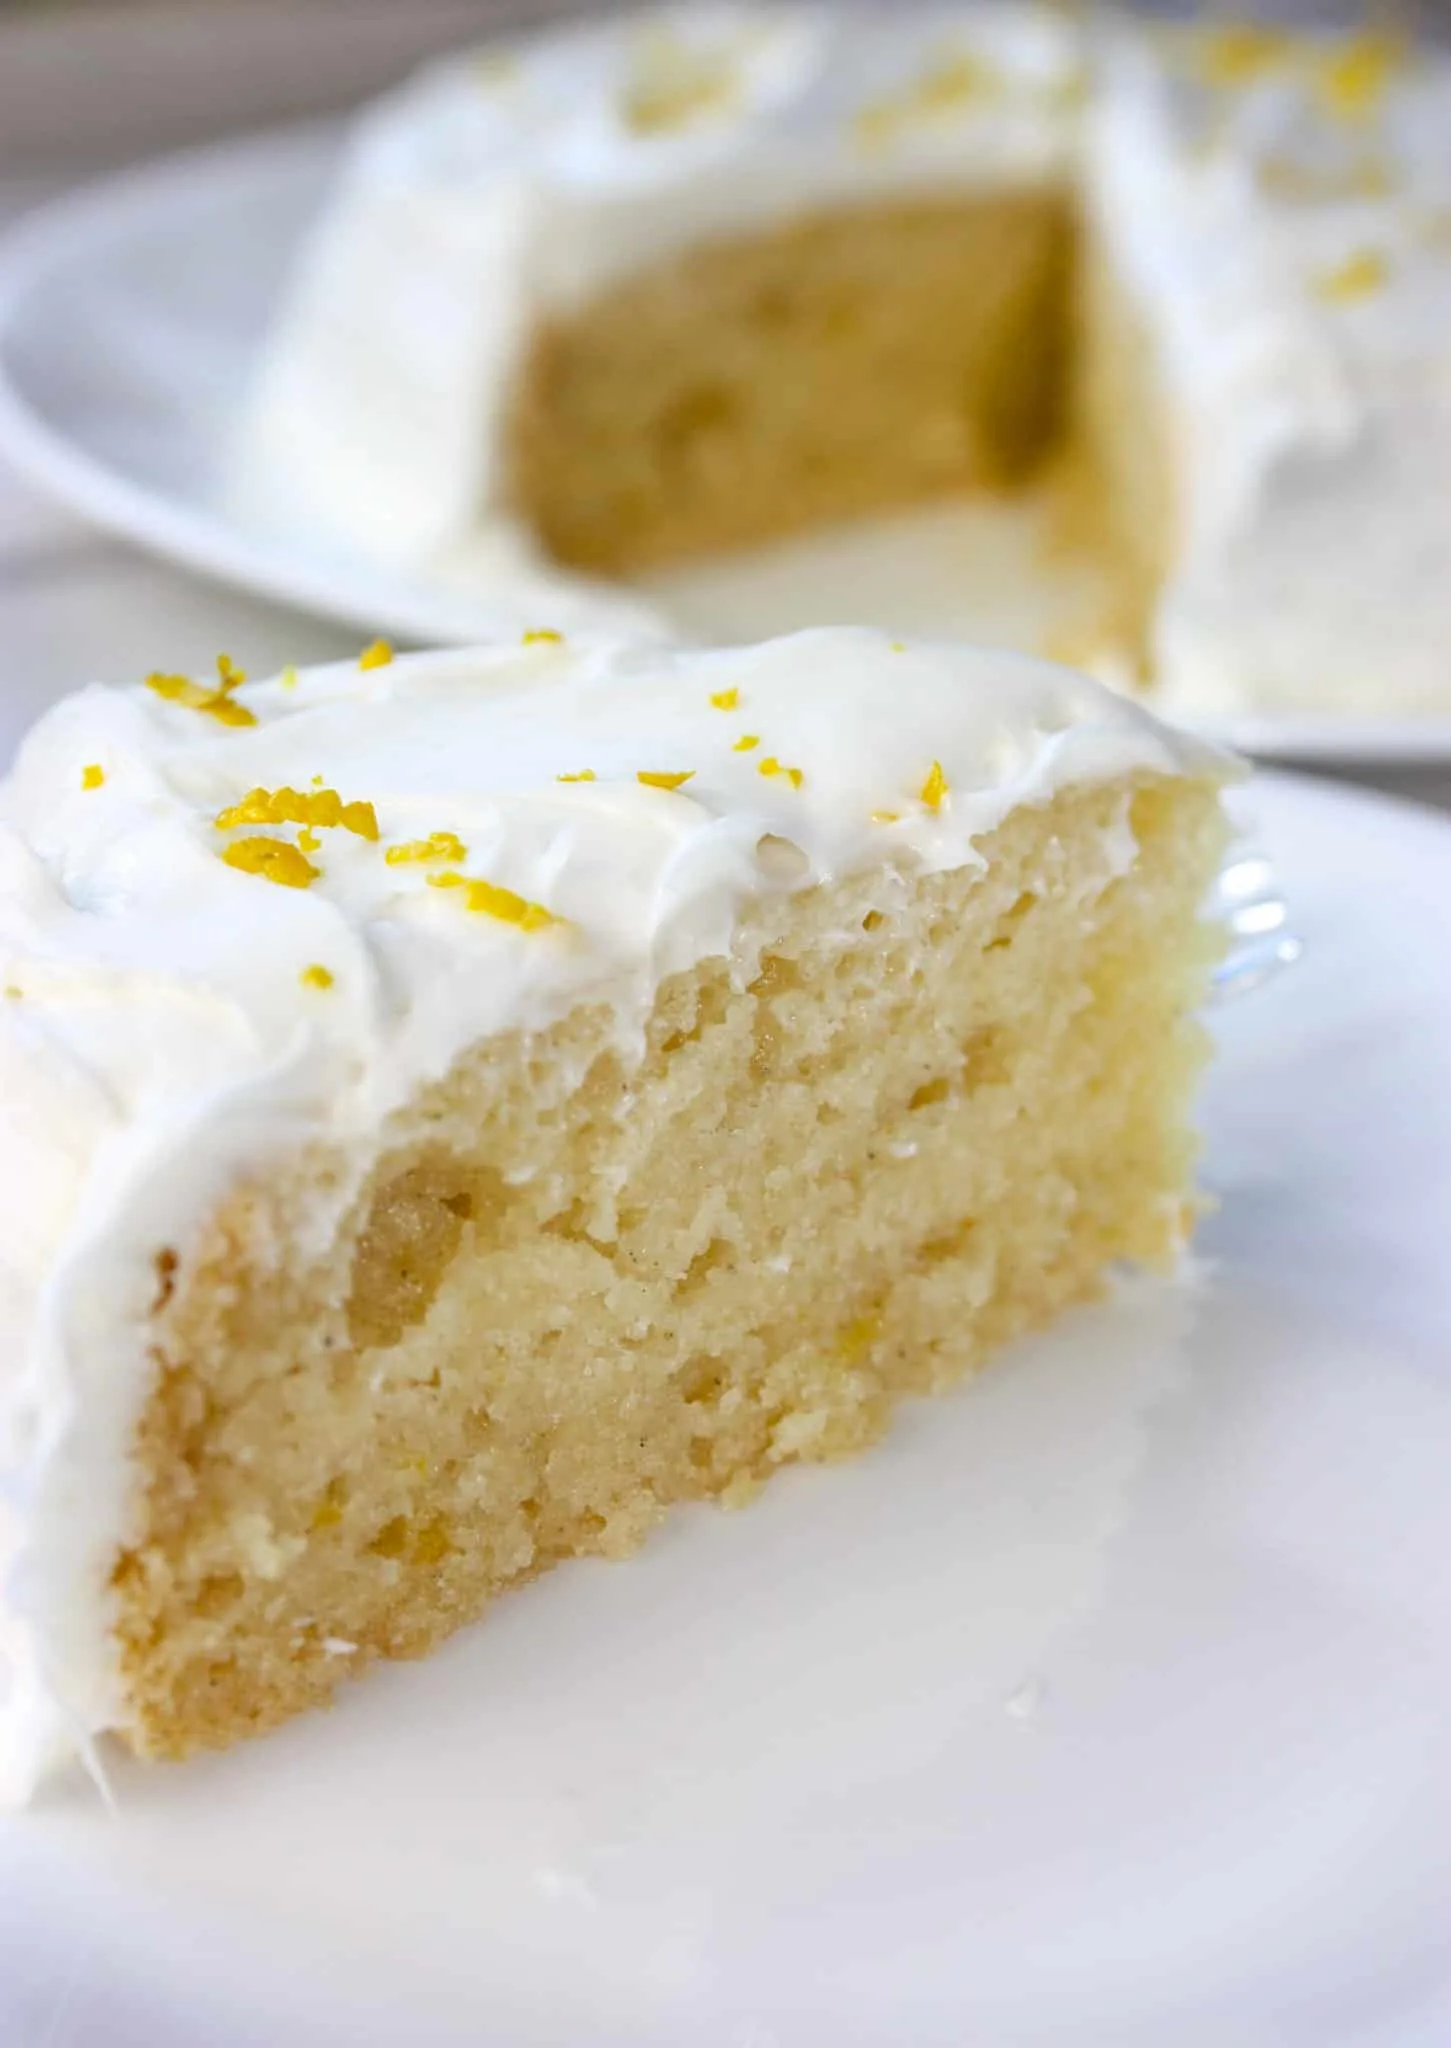 I am really enjoying the citrus flavours this spring.  Instant Pot Lemon Cake is another easy pressure cooker recipe that is loaded with citrus flavour.  